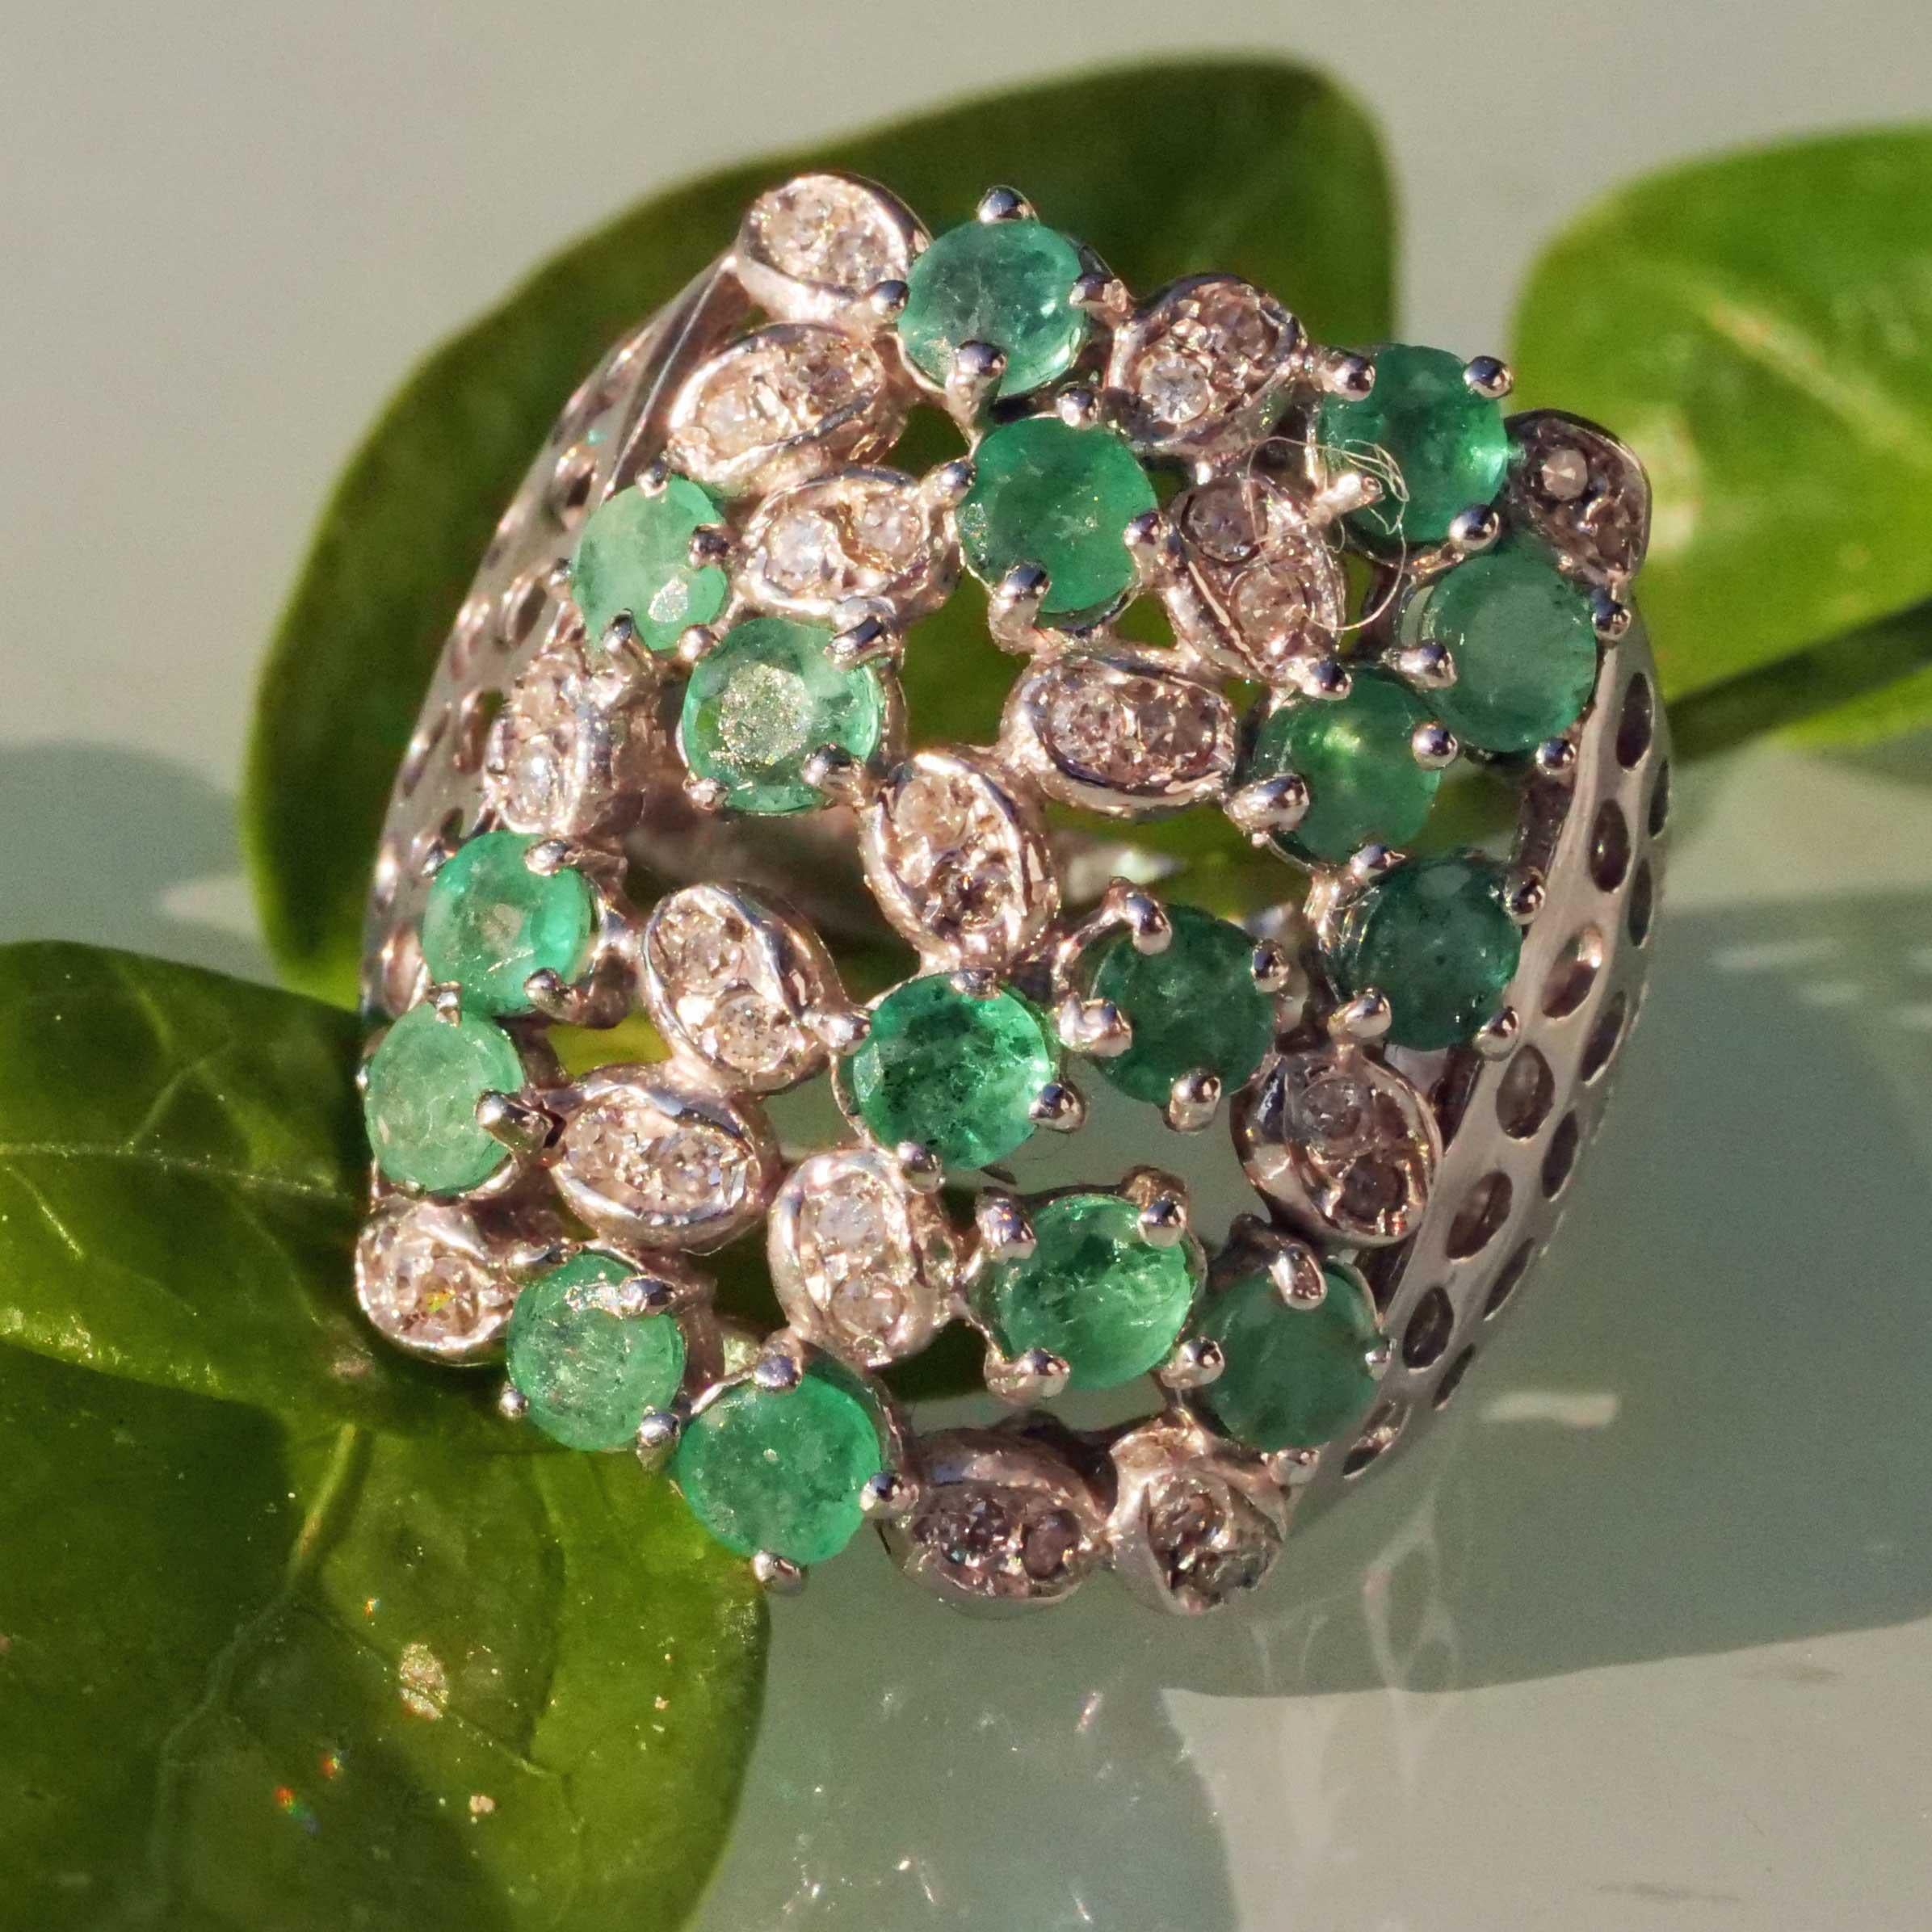 Italian way of life, a representative emerald diamond ring of a special kind, looks beautiful on the hand, 32 full-cut diamonds set in leaf-shaped settings totaling approx. 0.40 ct, W (white) / SI-P1 (small, clear inclusions), Sixteen round faceted